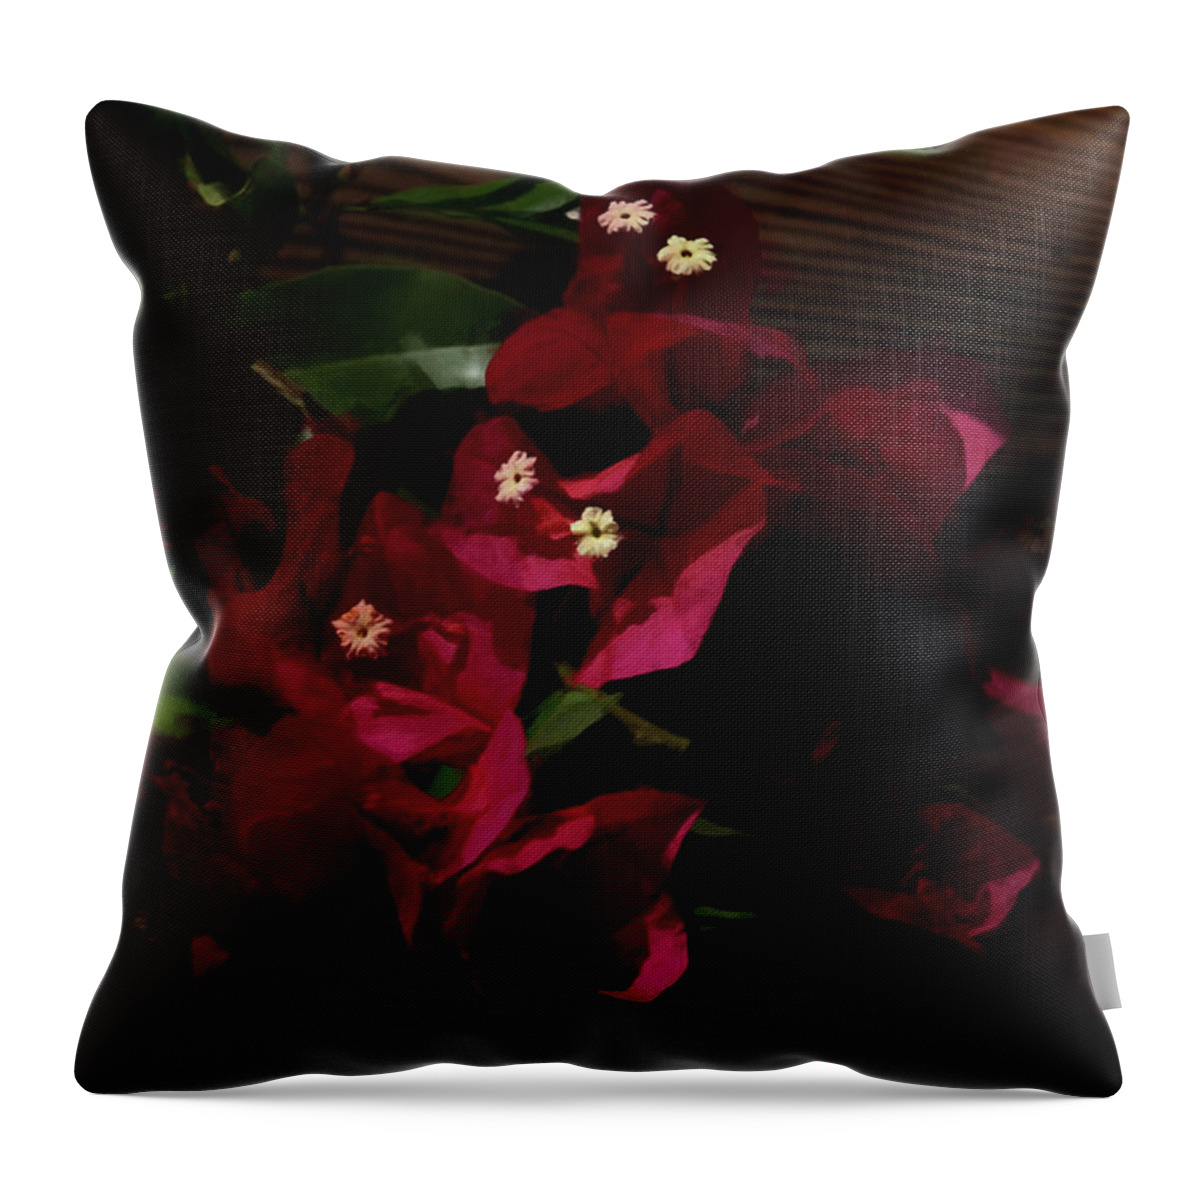 Bougainvillea Throw Pillow featuring the digital art The Bougainvilleas by Ernest Echols